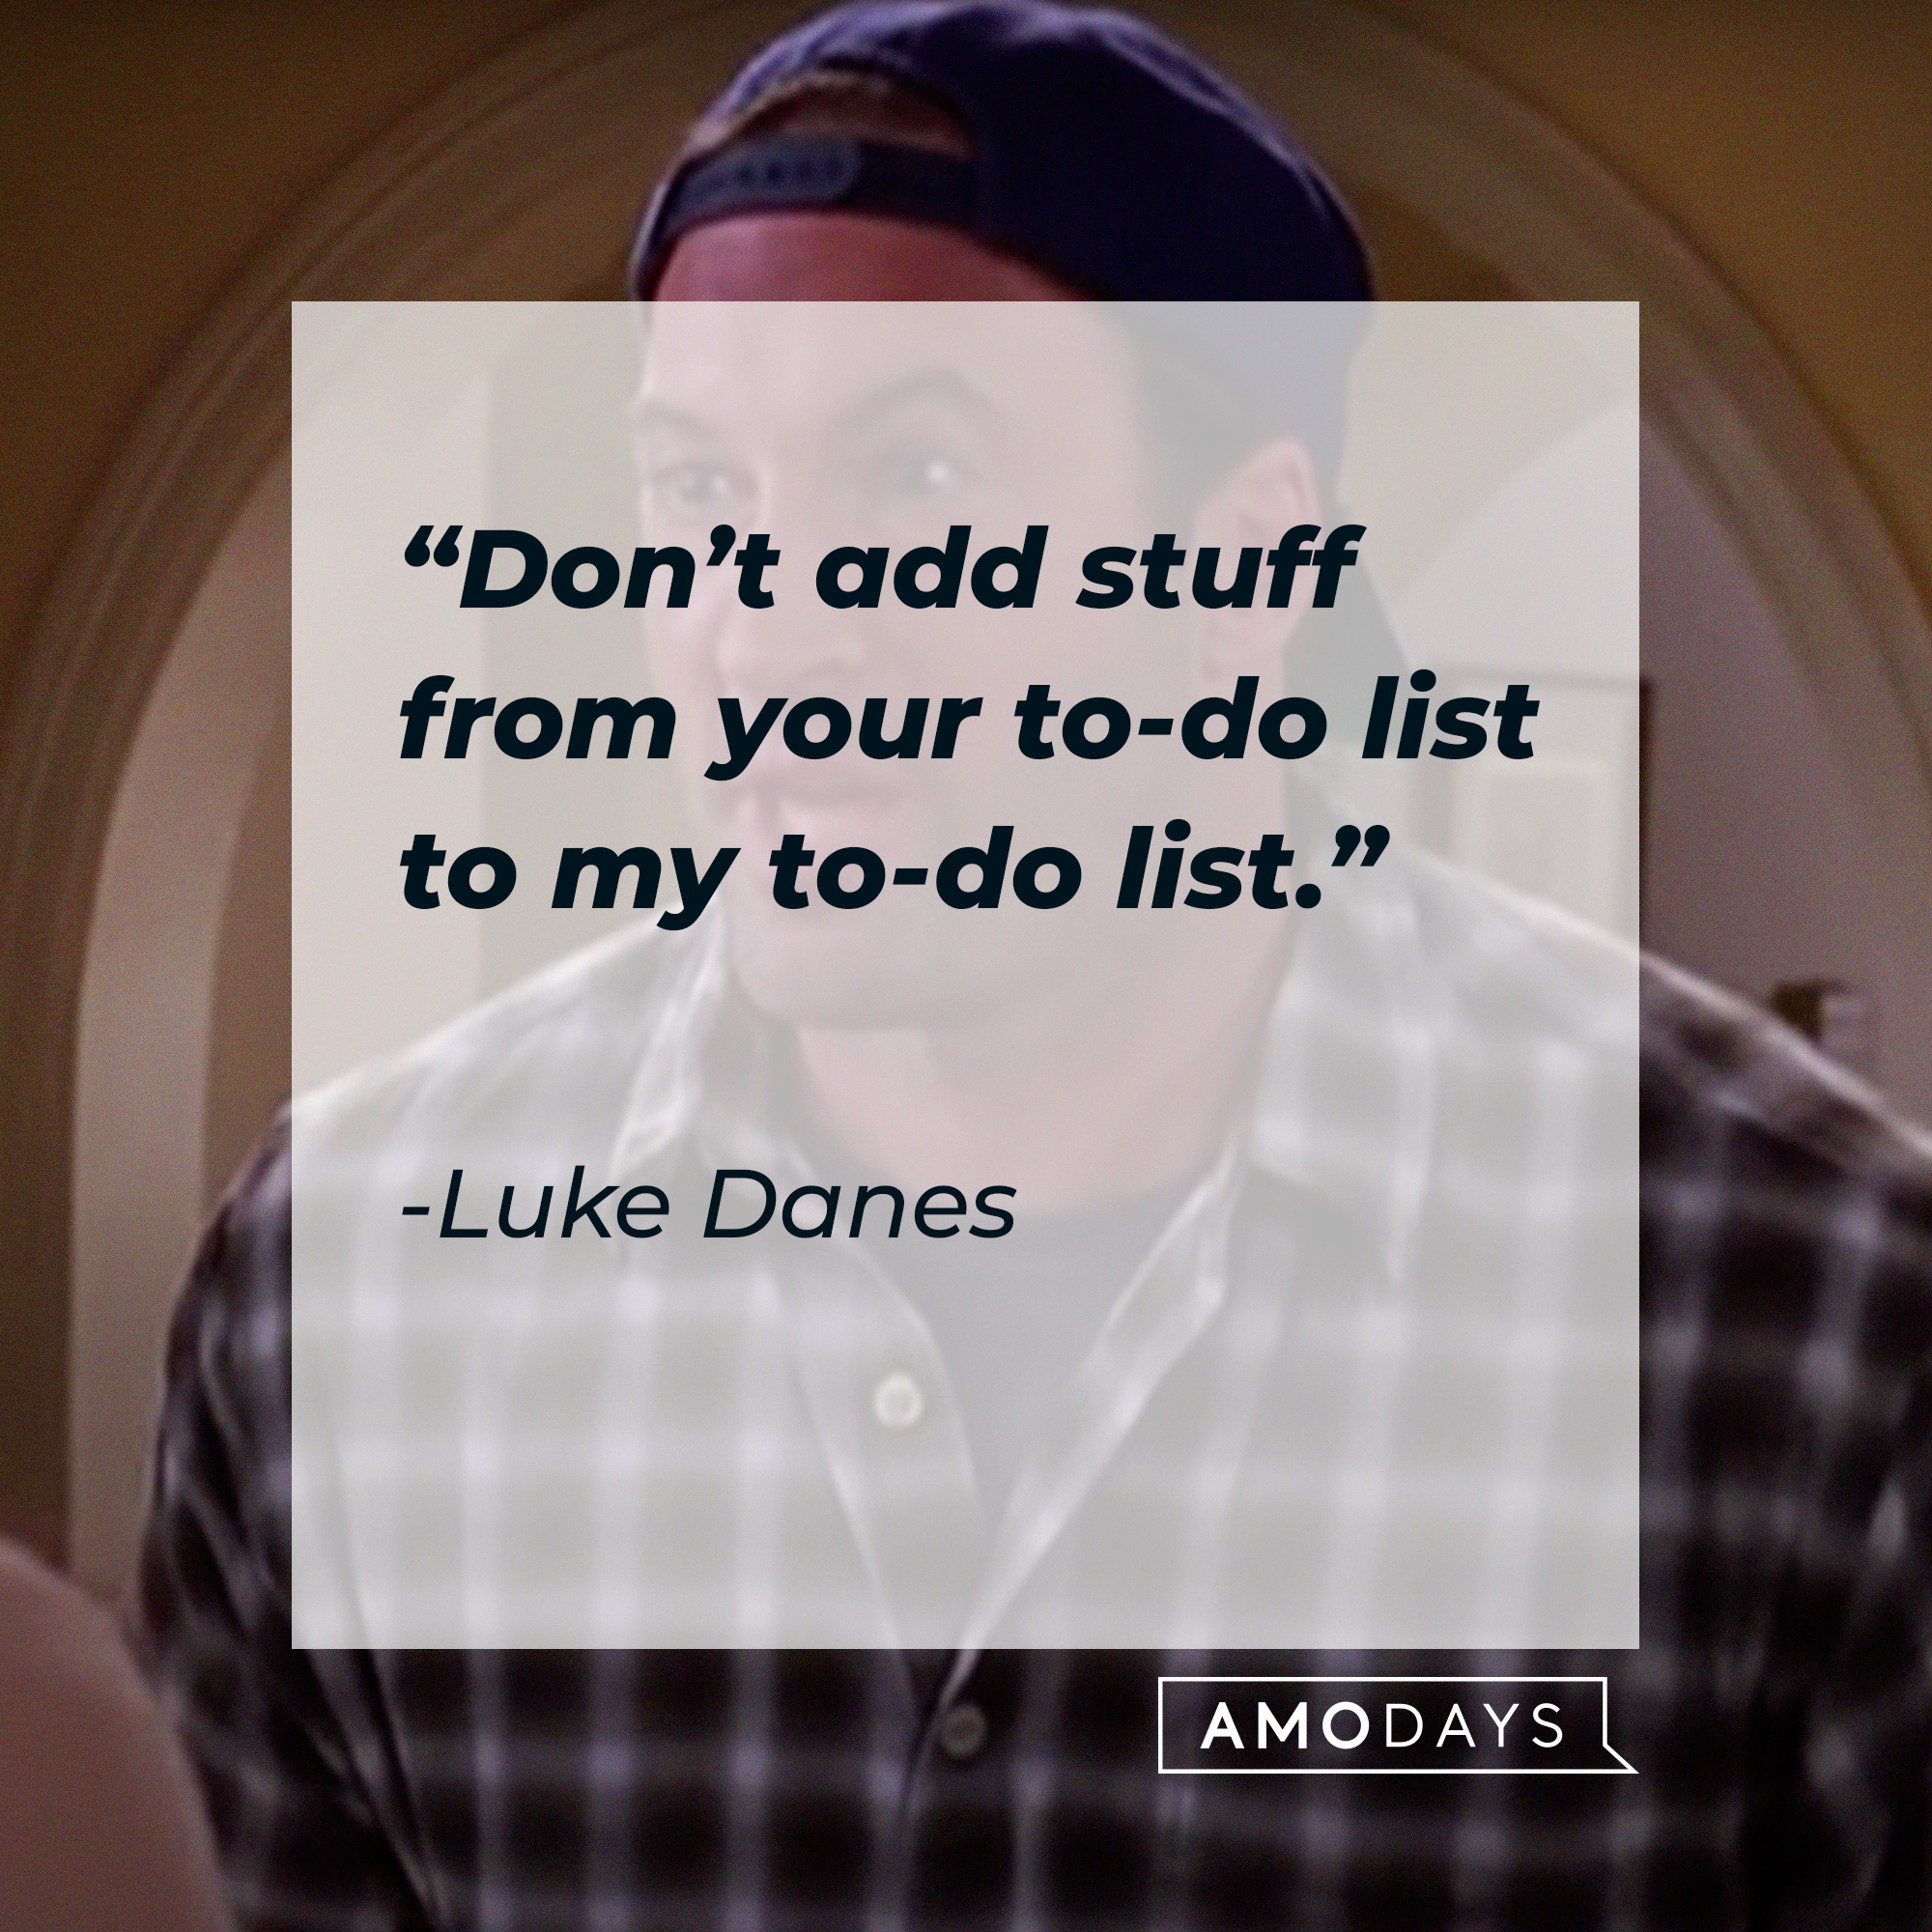 Luke Danes, with his quote:“Don’t add stuff from your to-do list to my to-do list.” |Source: facebook.com/GilmoreGirls